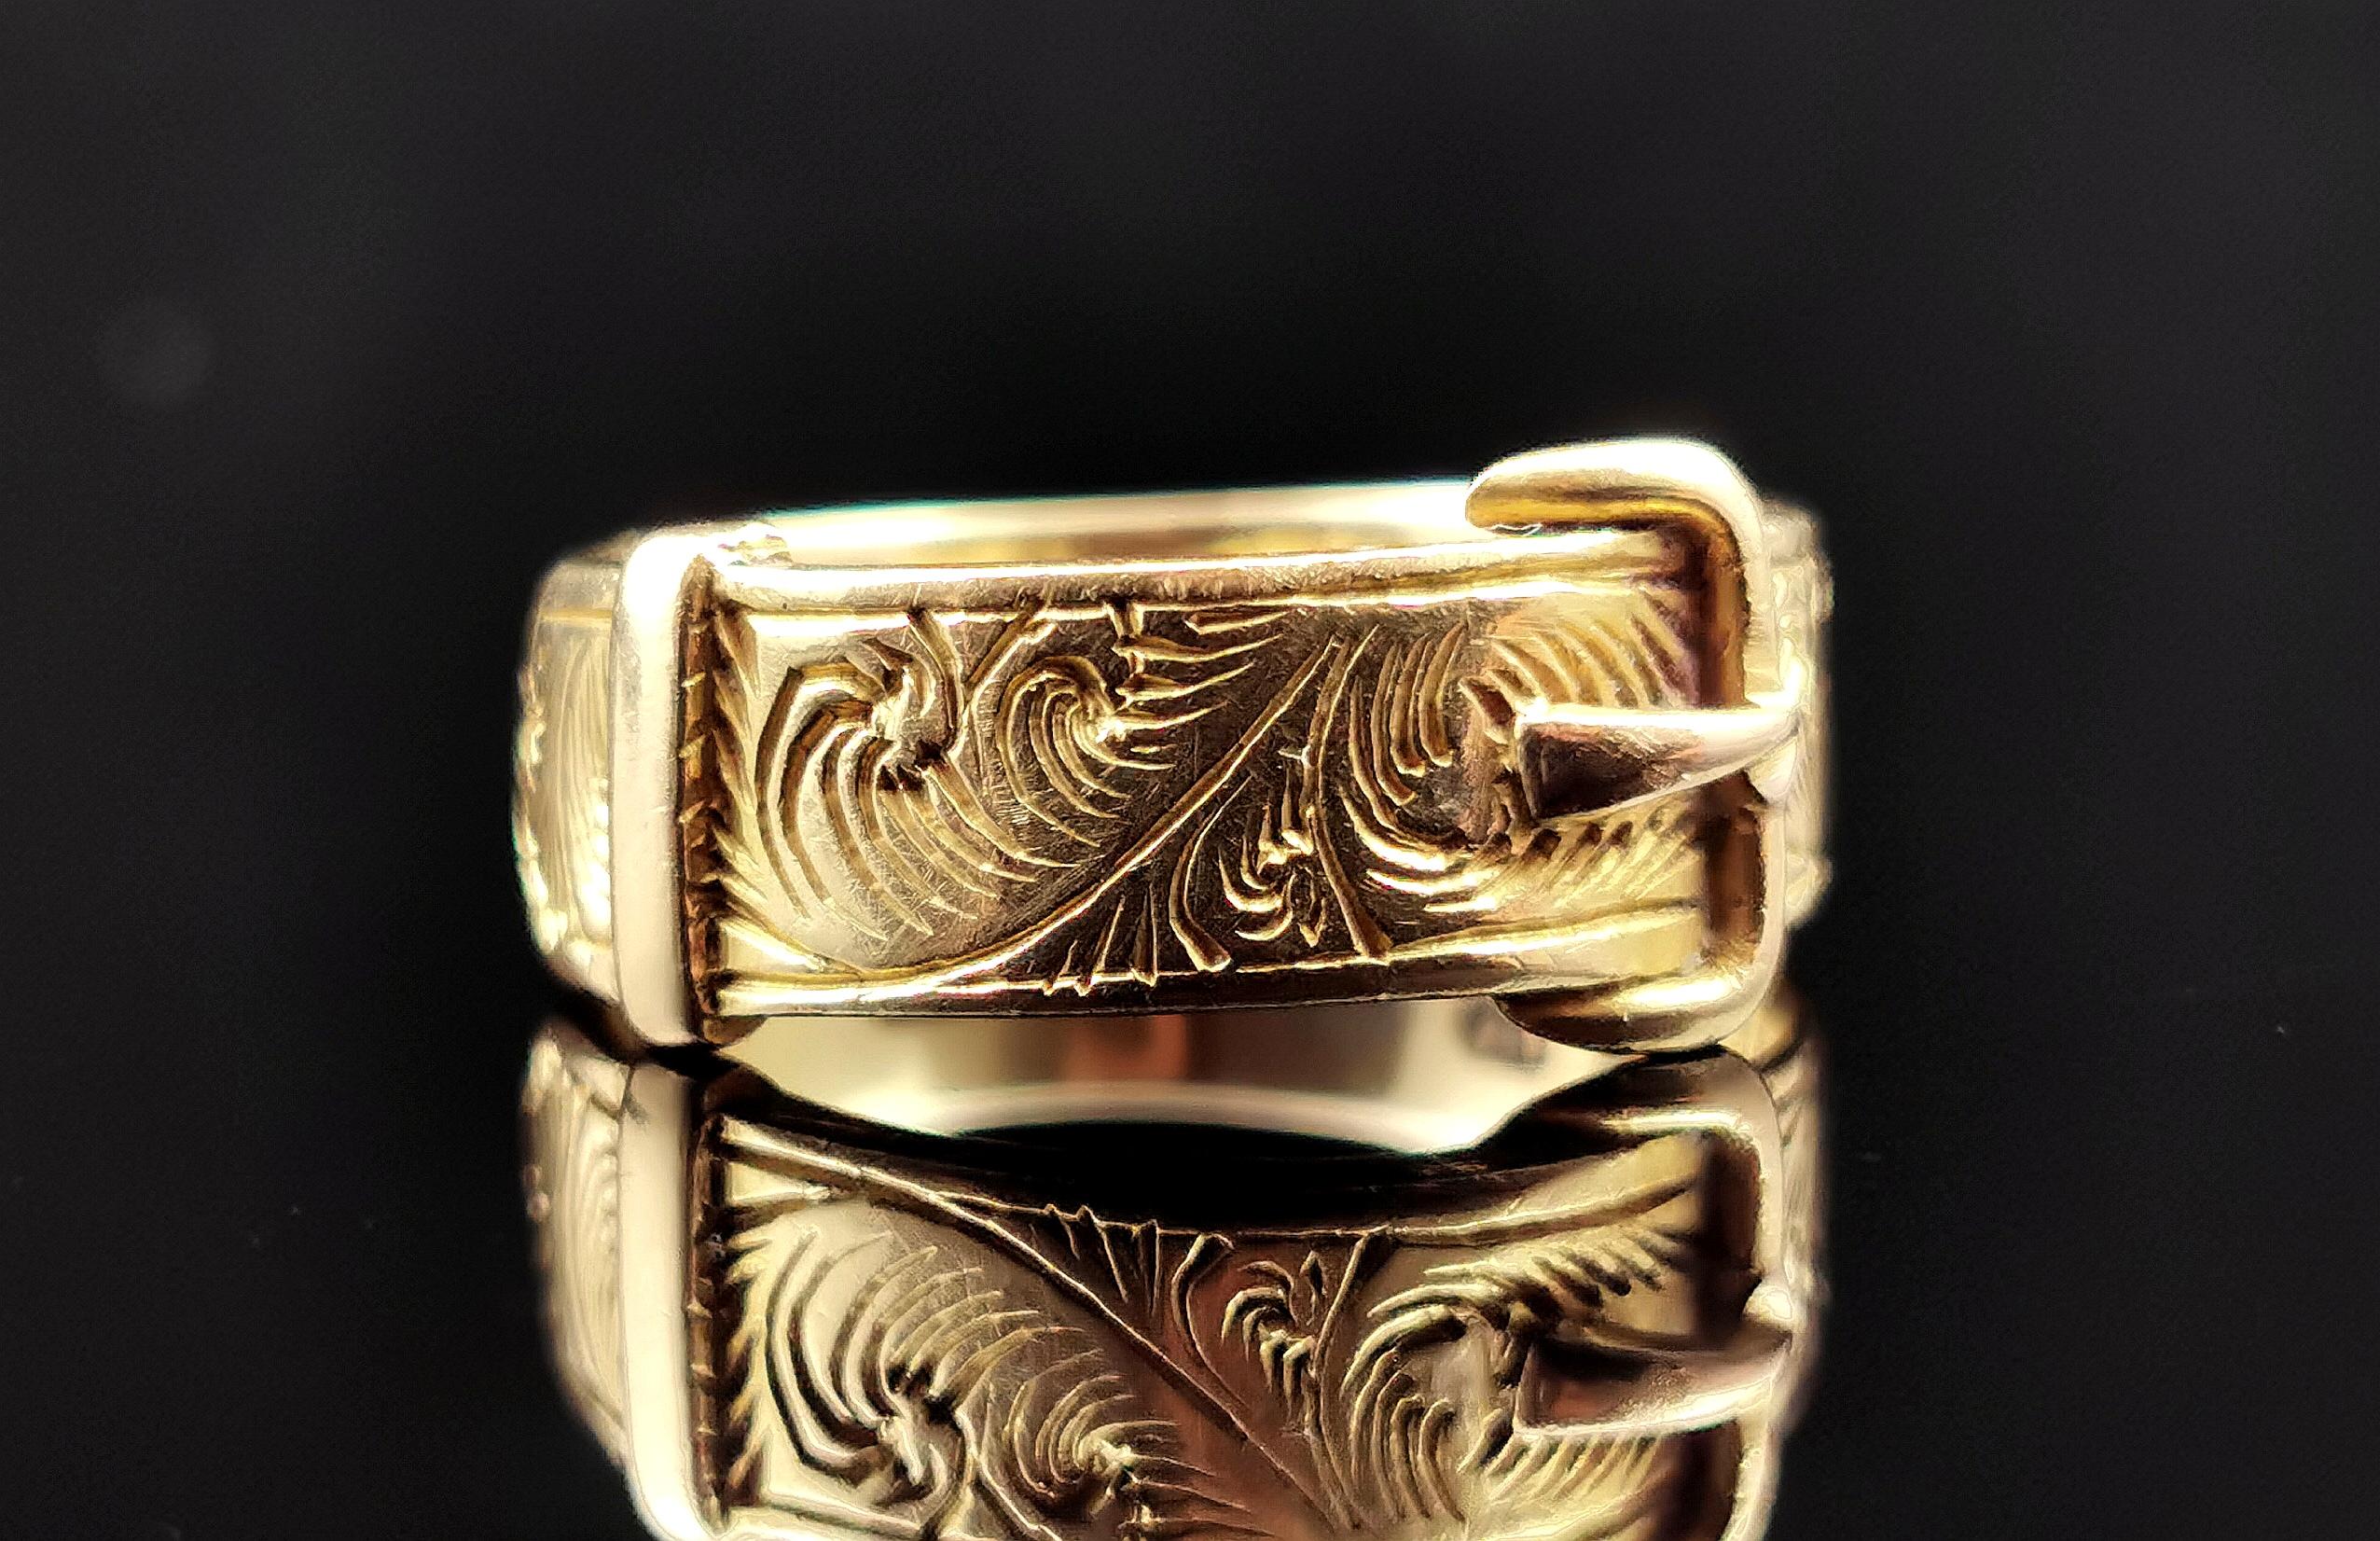 A stunning antique 18ct gold Buckle ring.

The rich gold band is engraved with flora and foliate and it has a buckle front design, the buckle traditionally symbolises holding someone close or near and this really shows the sentiment in this